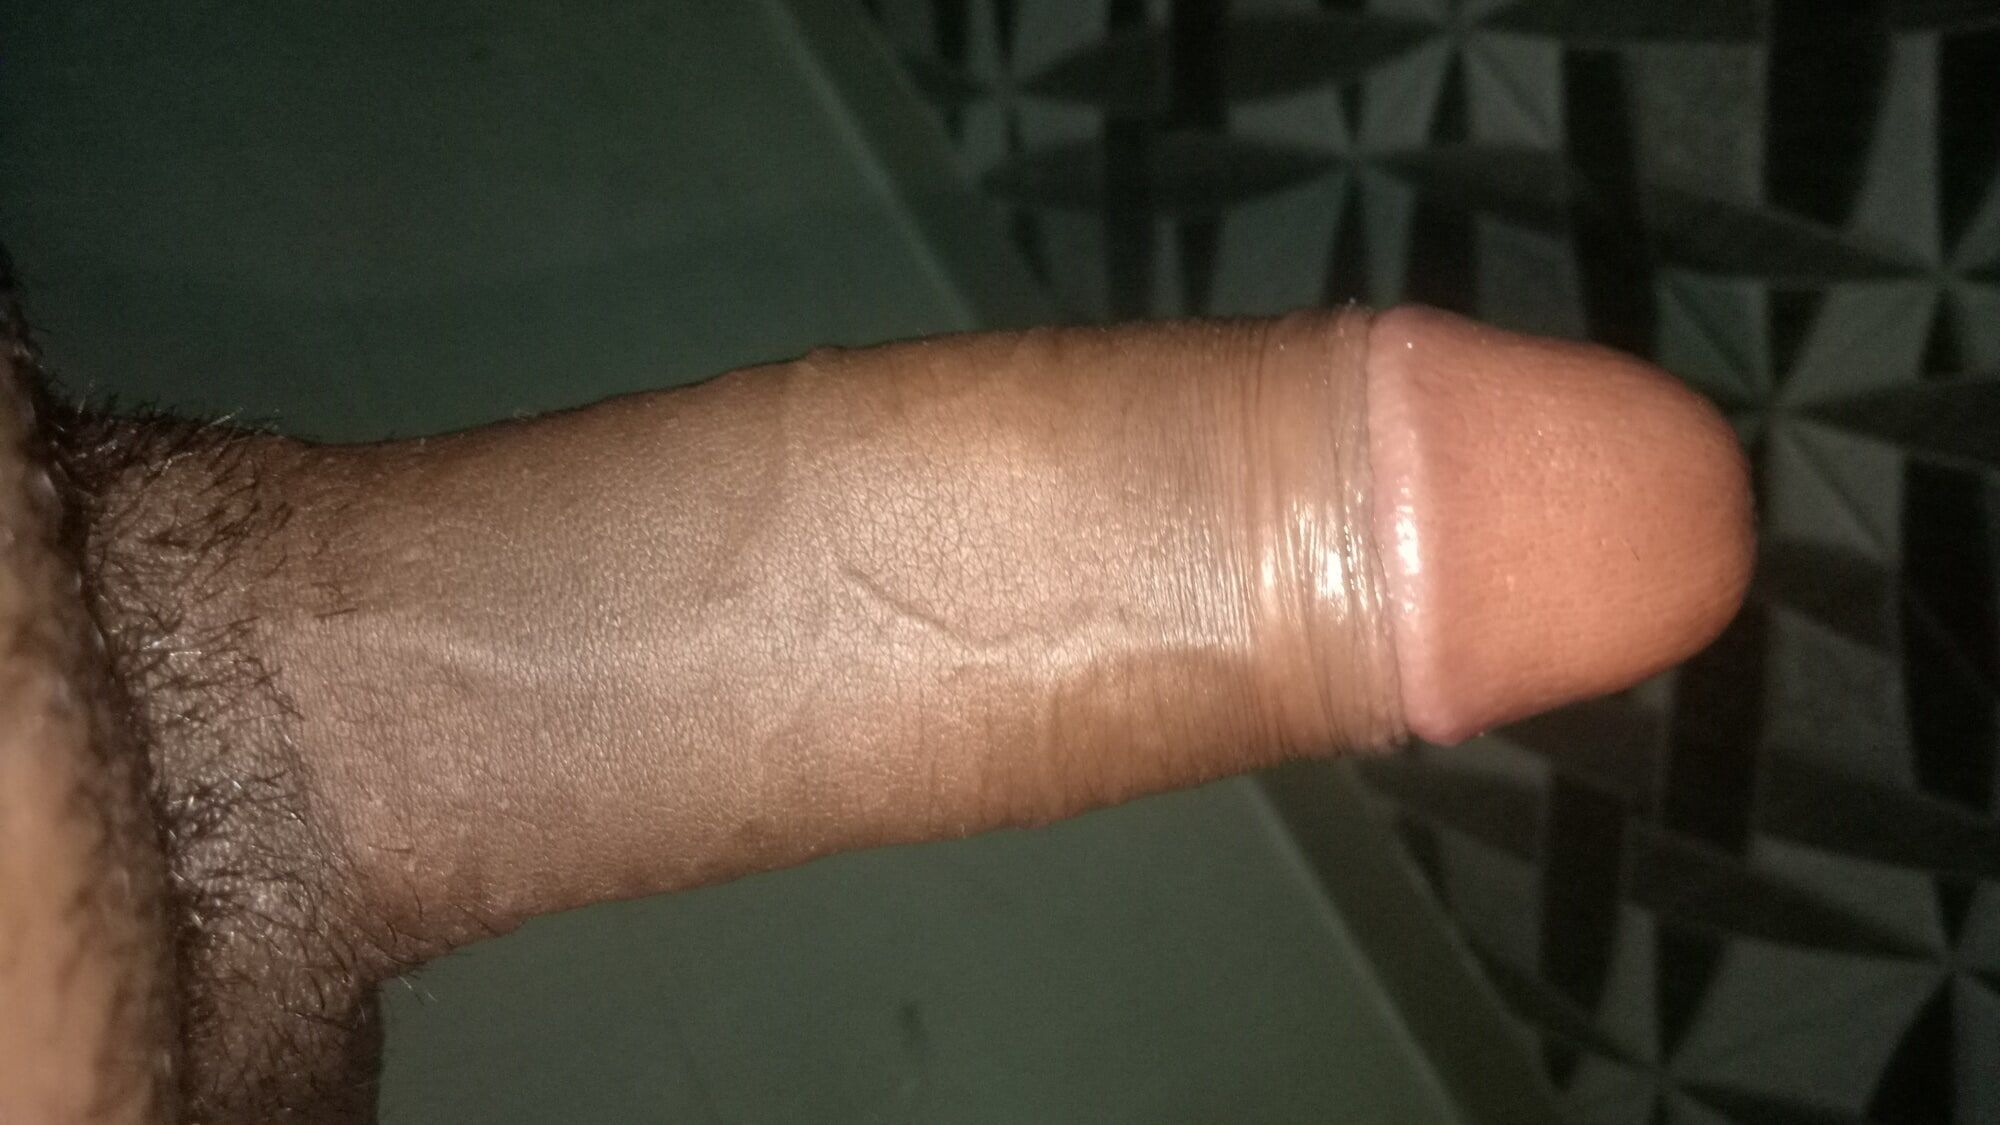 6.9 INCE LONG COCK MY PANIS  AND4.5 INCE MOTA  BLACK COCK H 